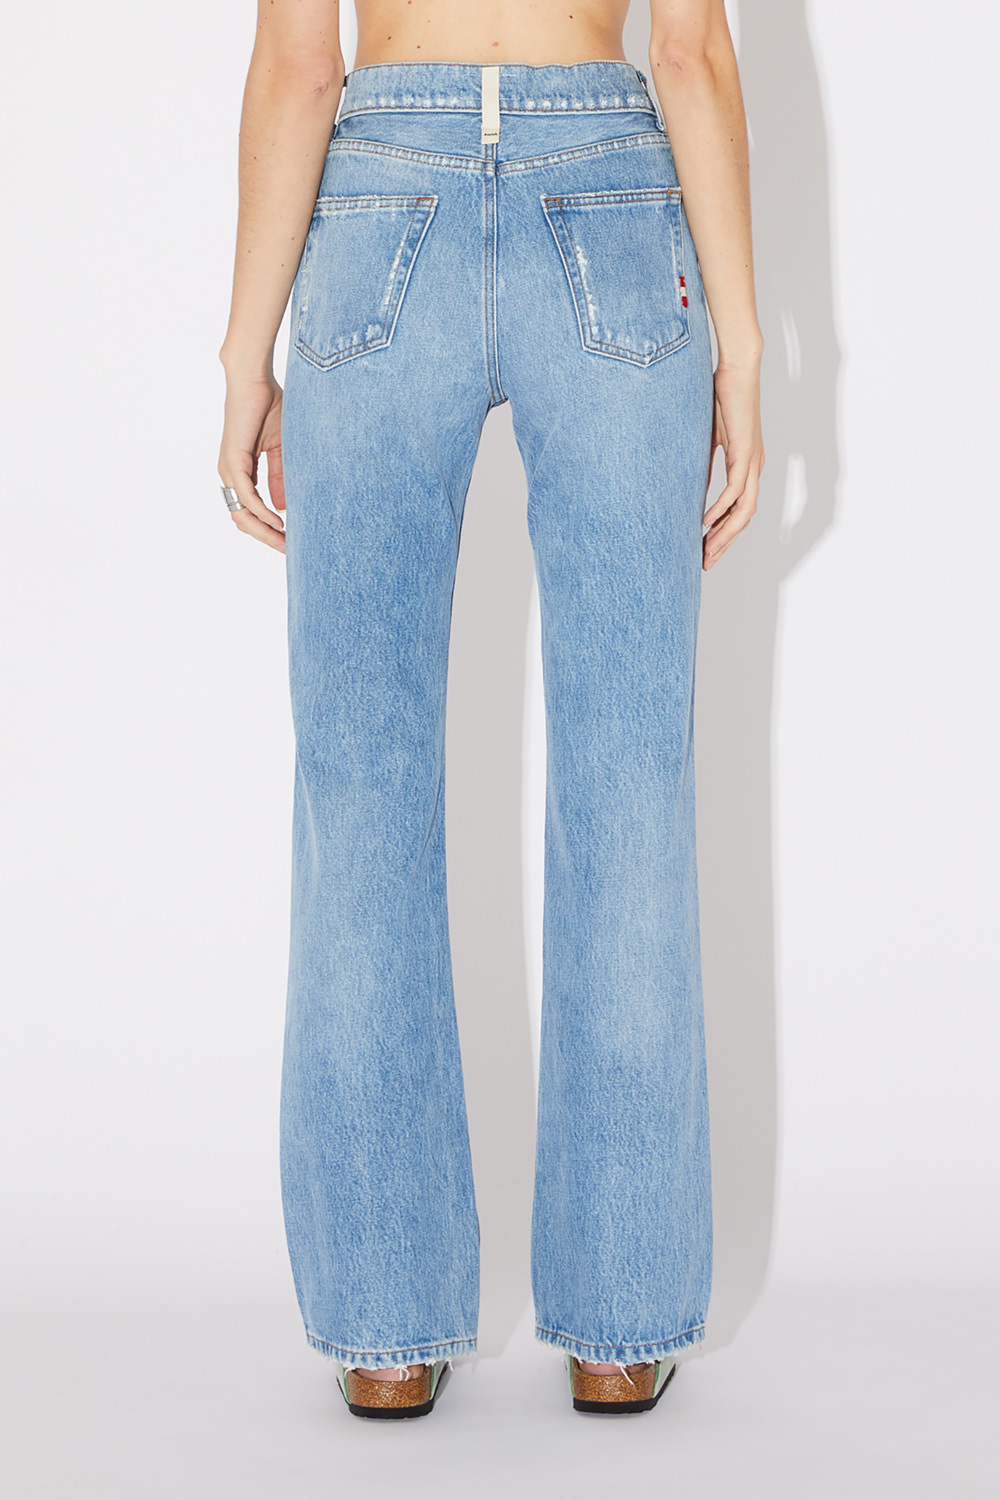 AMISH: SUMMERTIME KENDALL JEANS